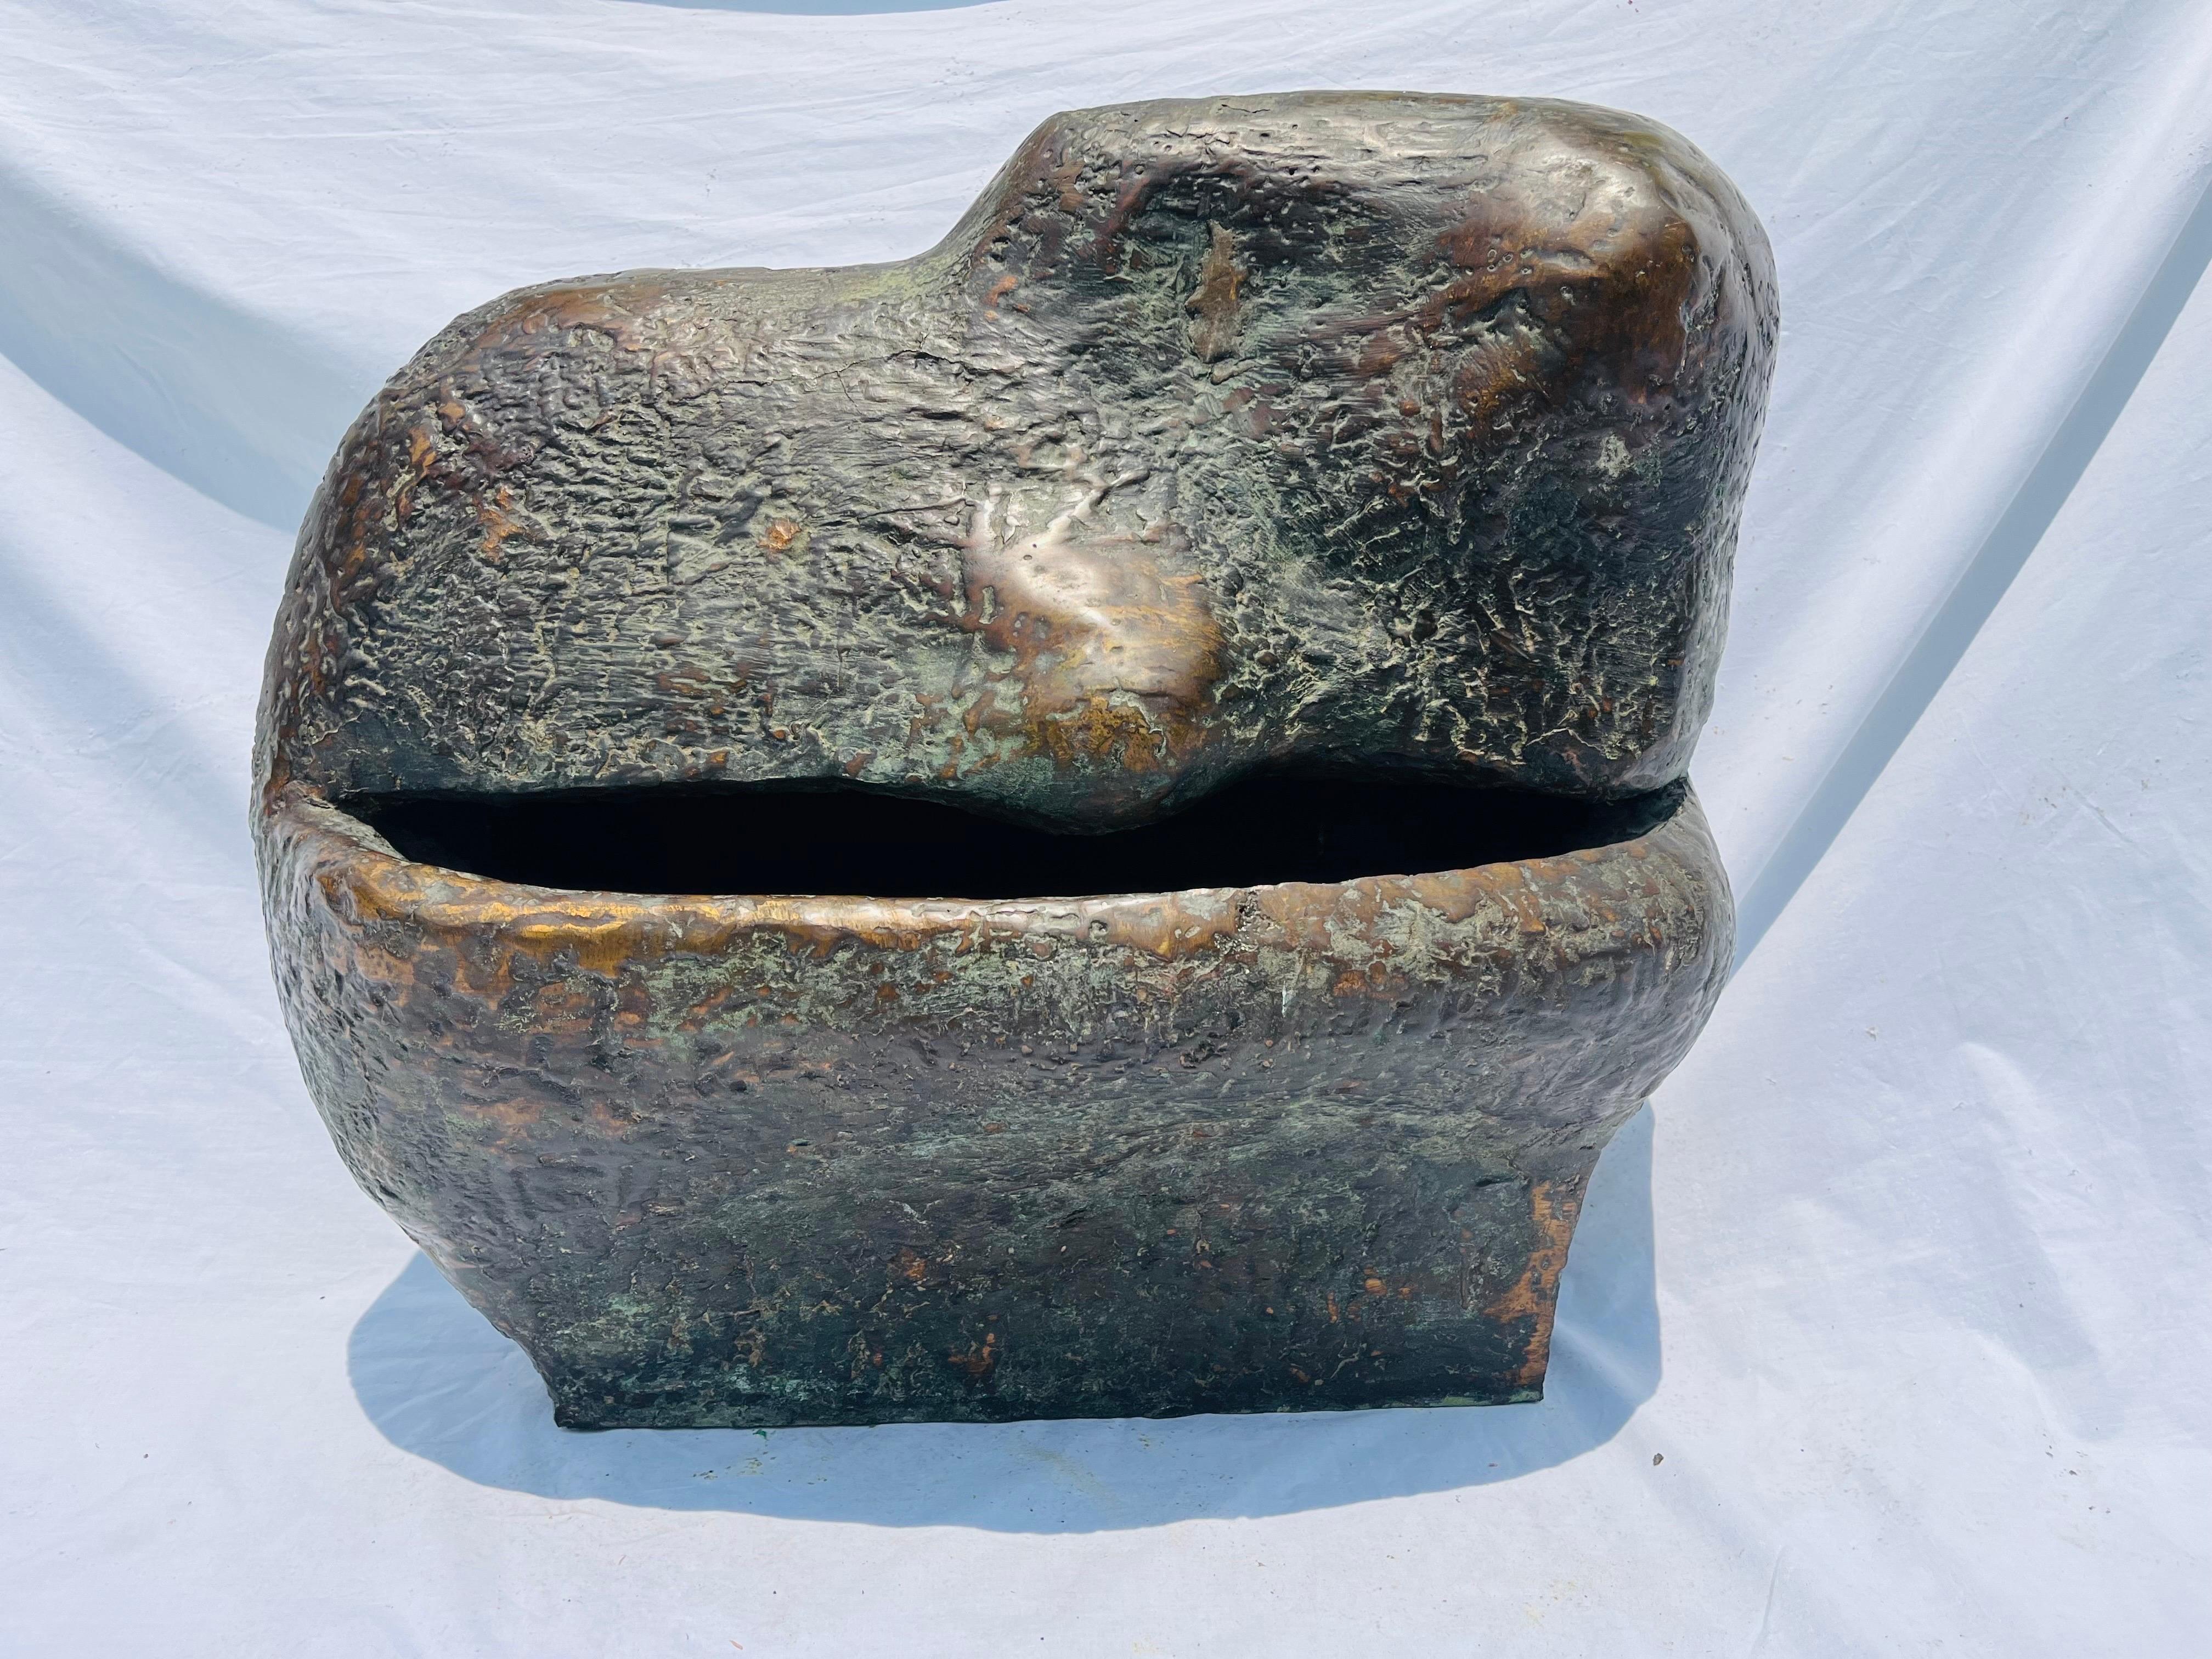 A truly monumental work of art. At over two feet wide and just shy of two feet in height, this incredible bronze abstract sculpture commands attention. The non representational, biomorphic, abstract form is the purest embodiment of abstract art,